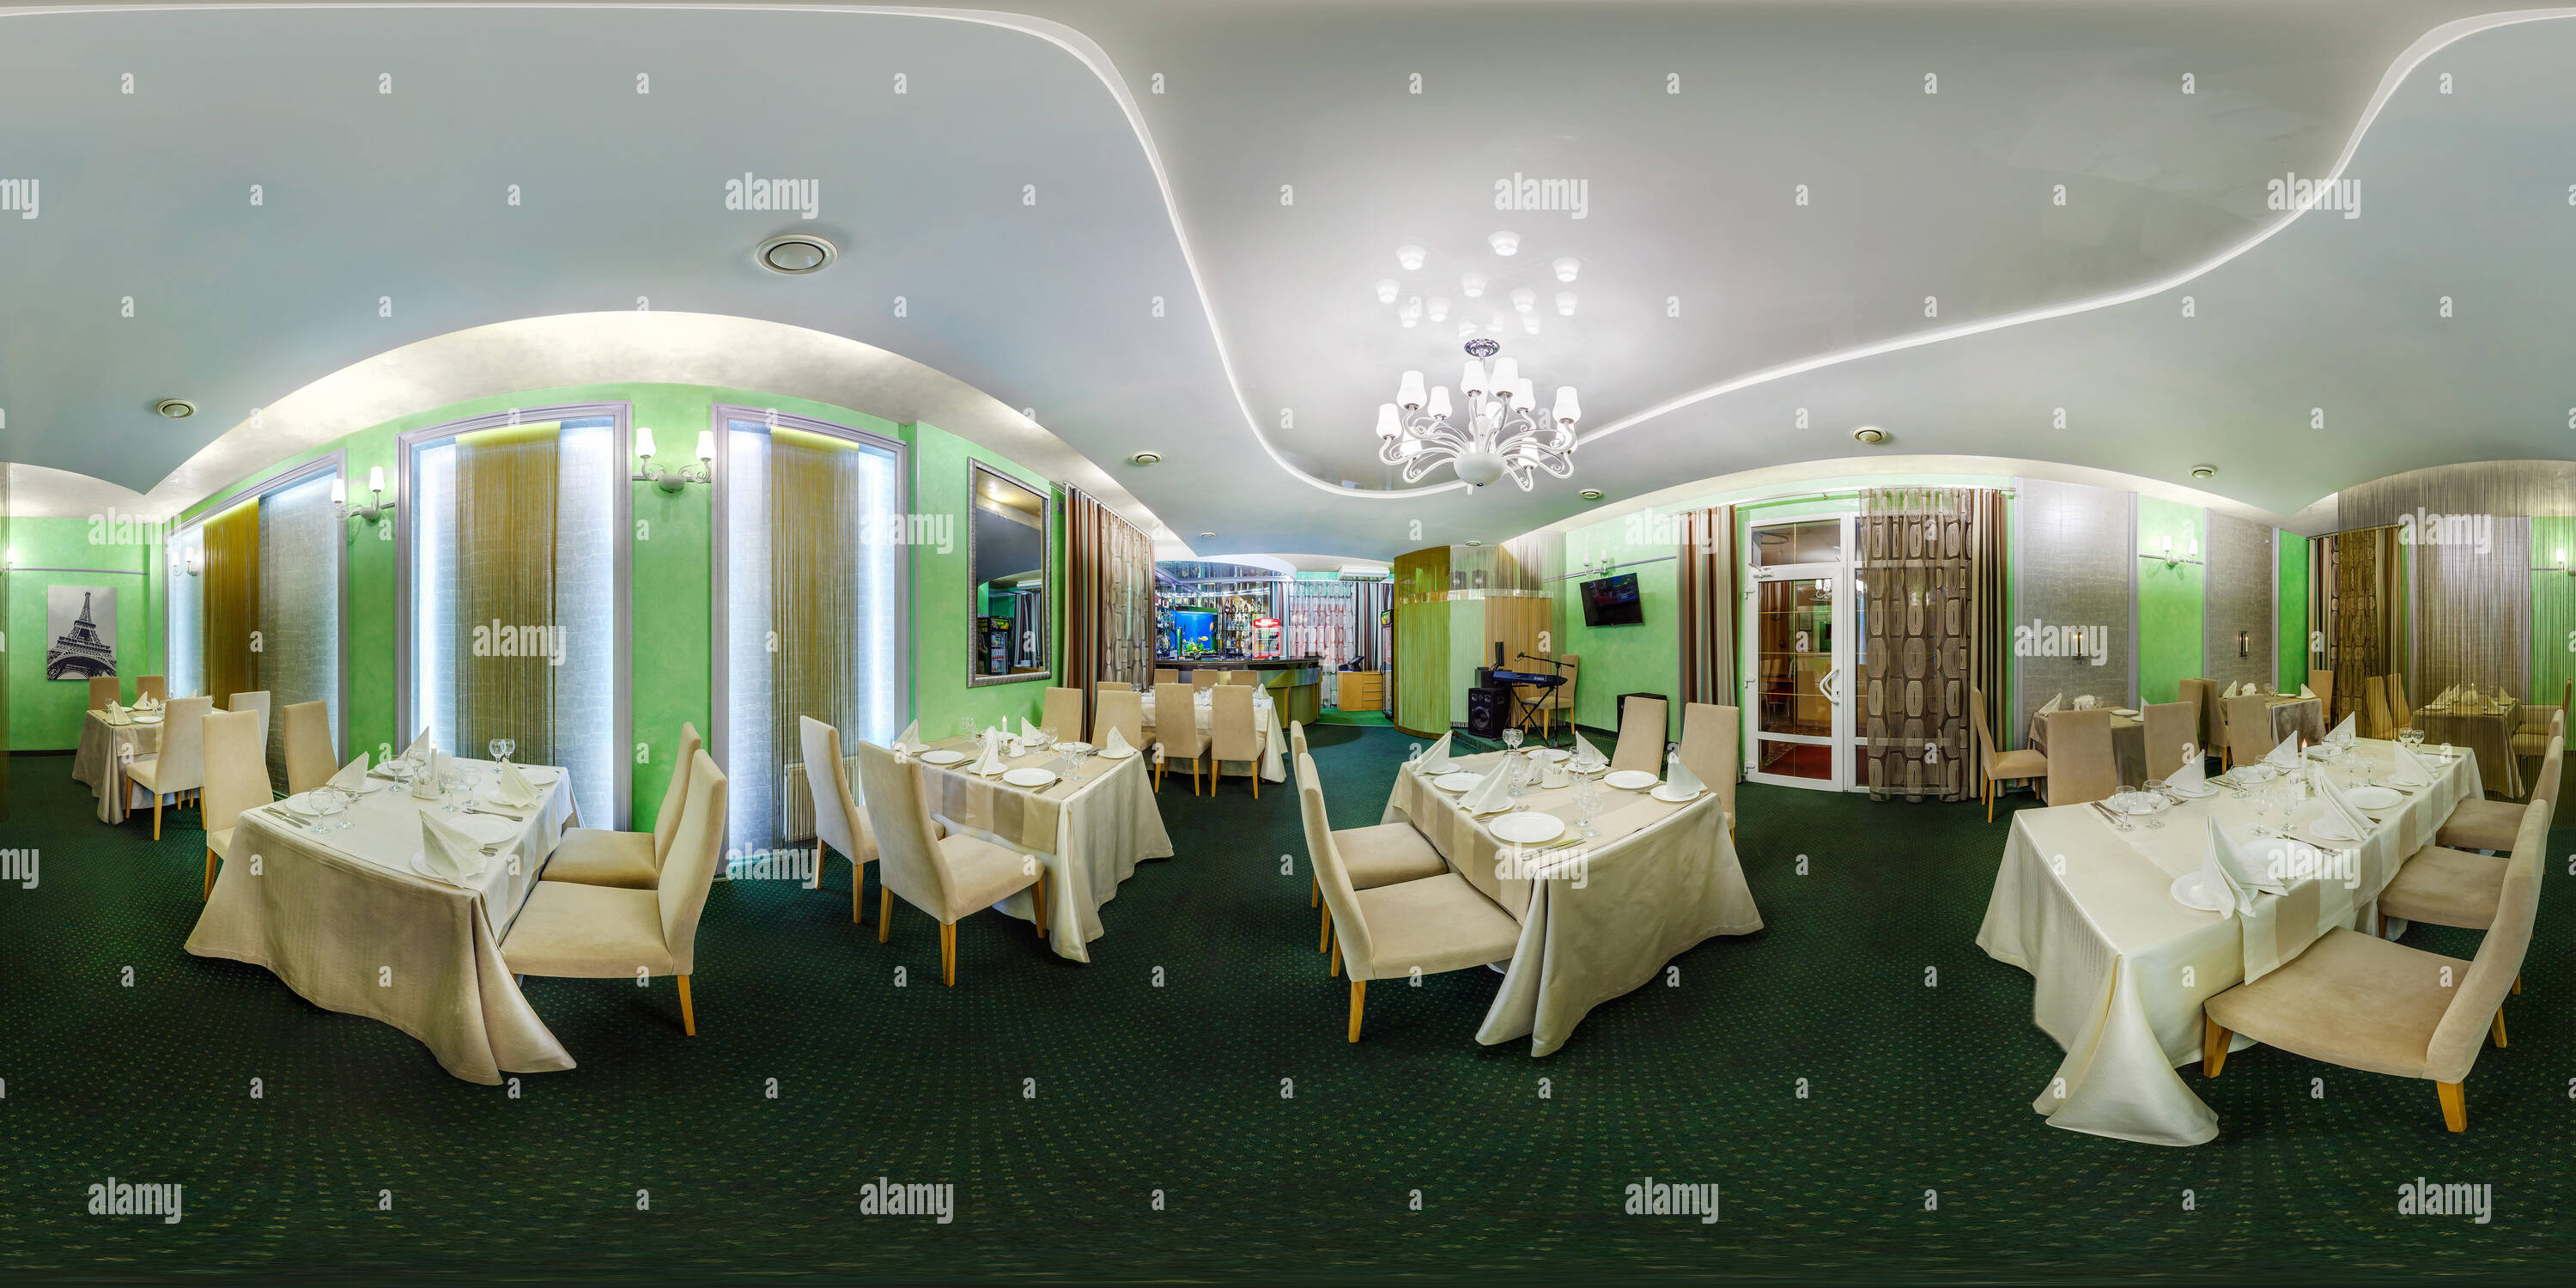 360 degree panoramic view of GRODNO, BELARUS - APRIL 1, 2014: full 360 degree panorama in equirectangular spherical equidistant projection. Panorama in interior of stylish cafe in